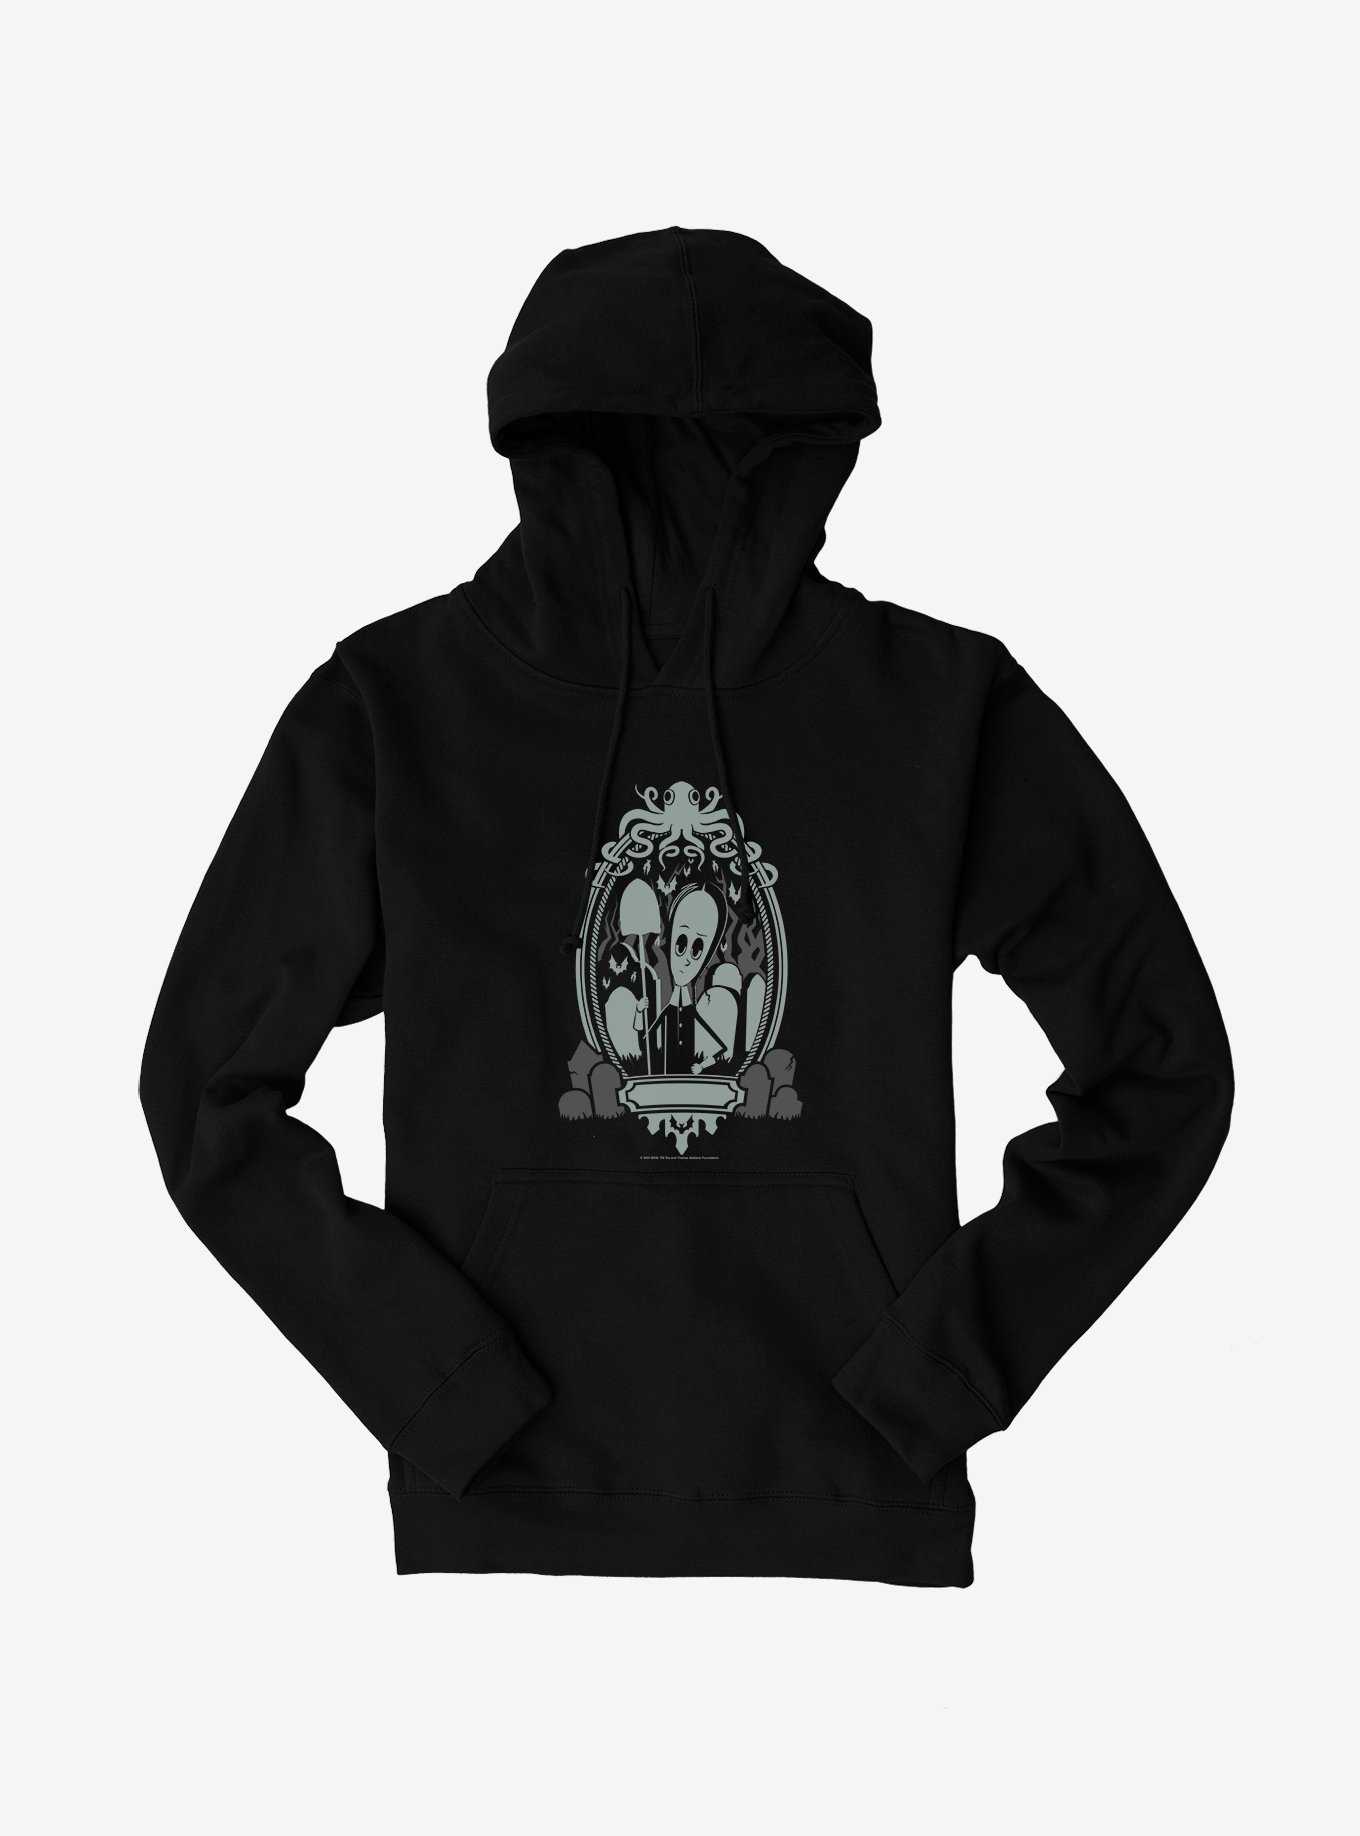 The Addams Family Wednesday Addams Hoodie, , hi-res